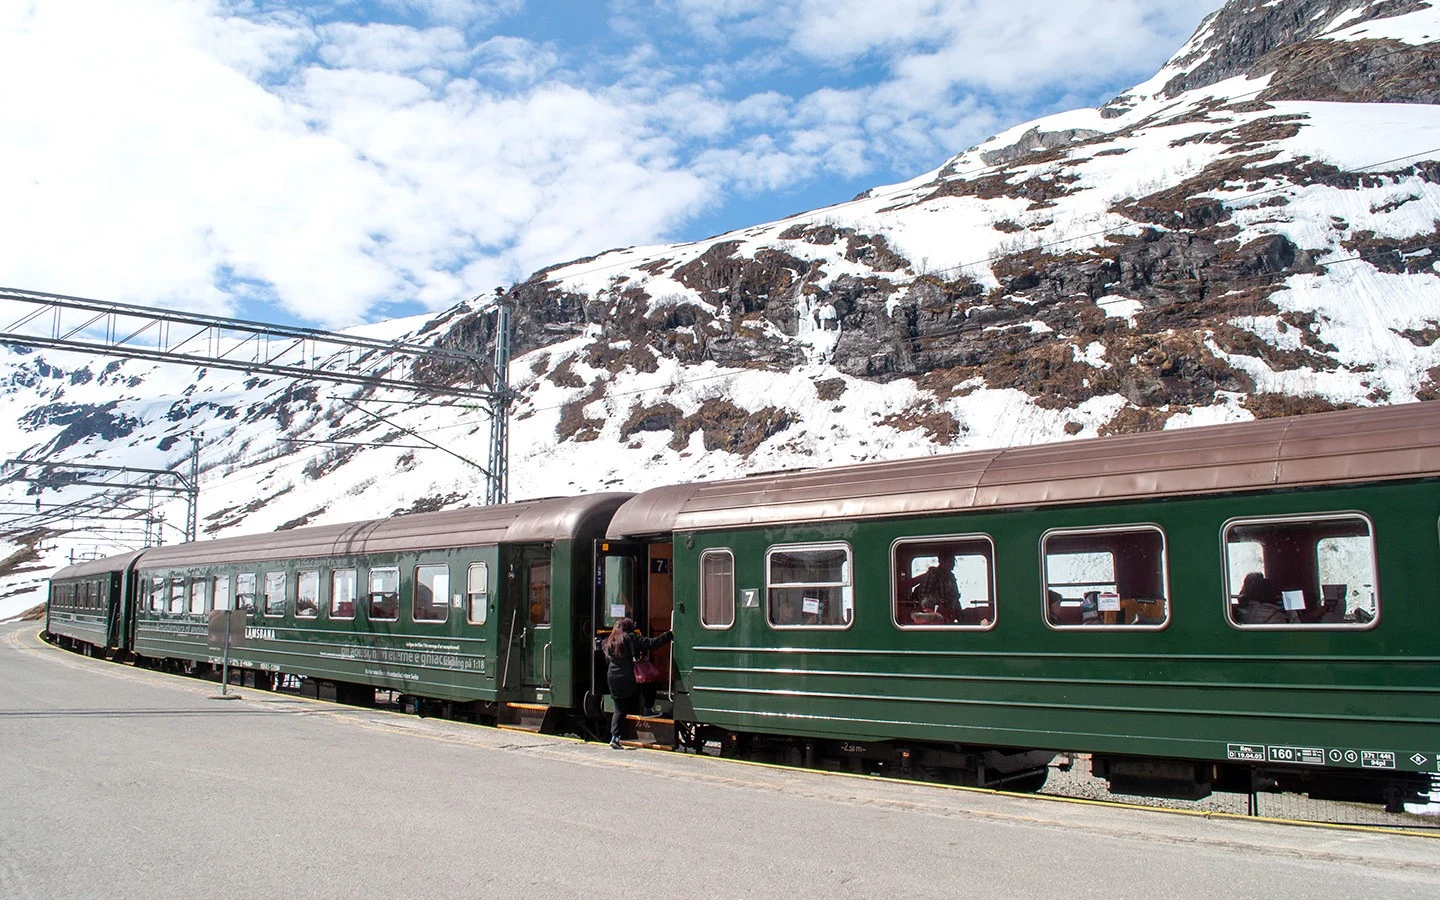 Europe by train: The Flamsbana scenic train in Norway